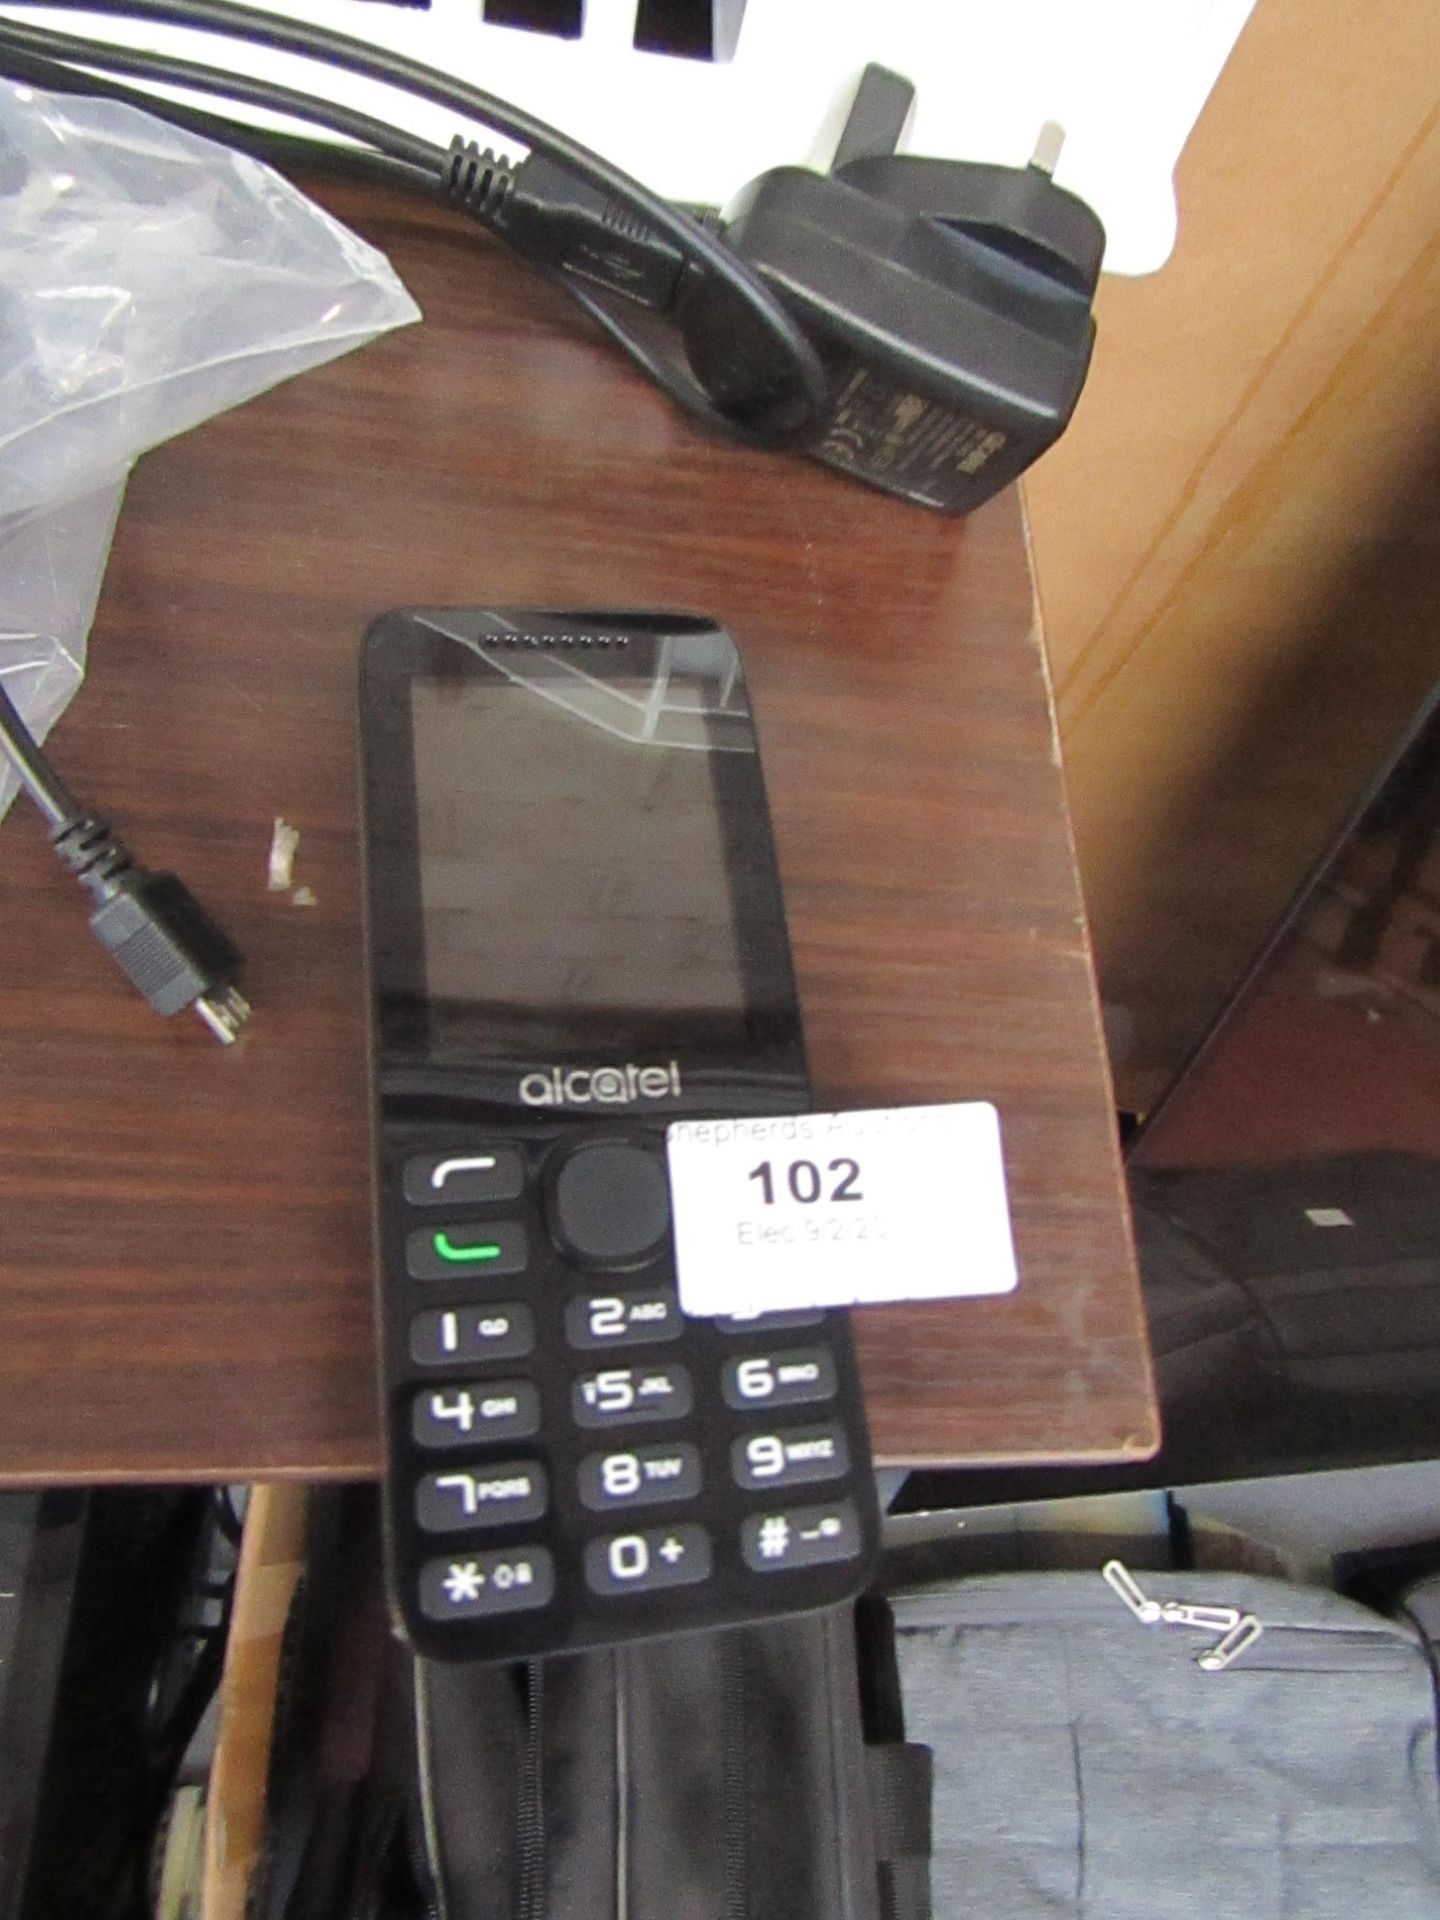 Alcatel - Mobile Phone, Includes Charger.